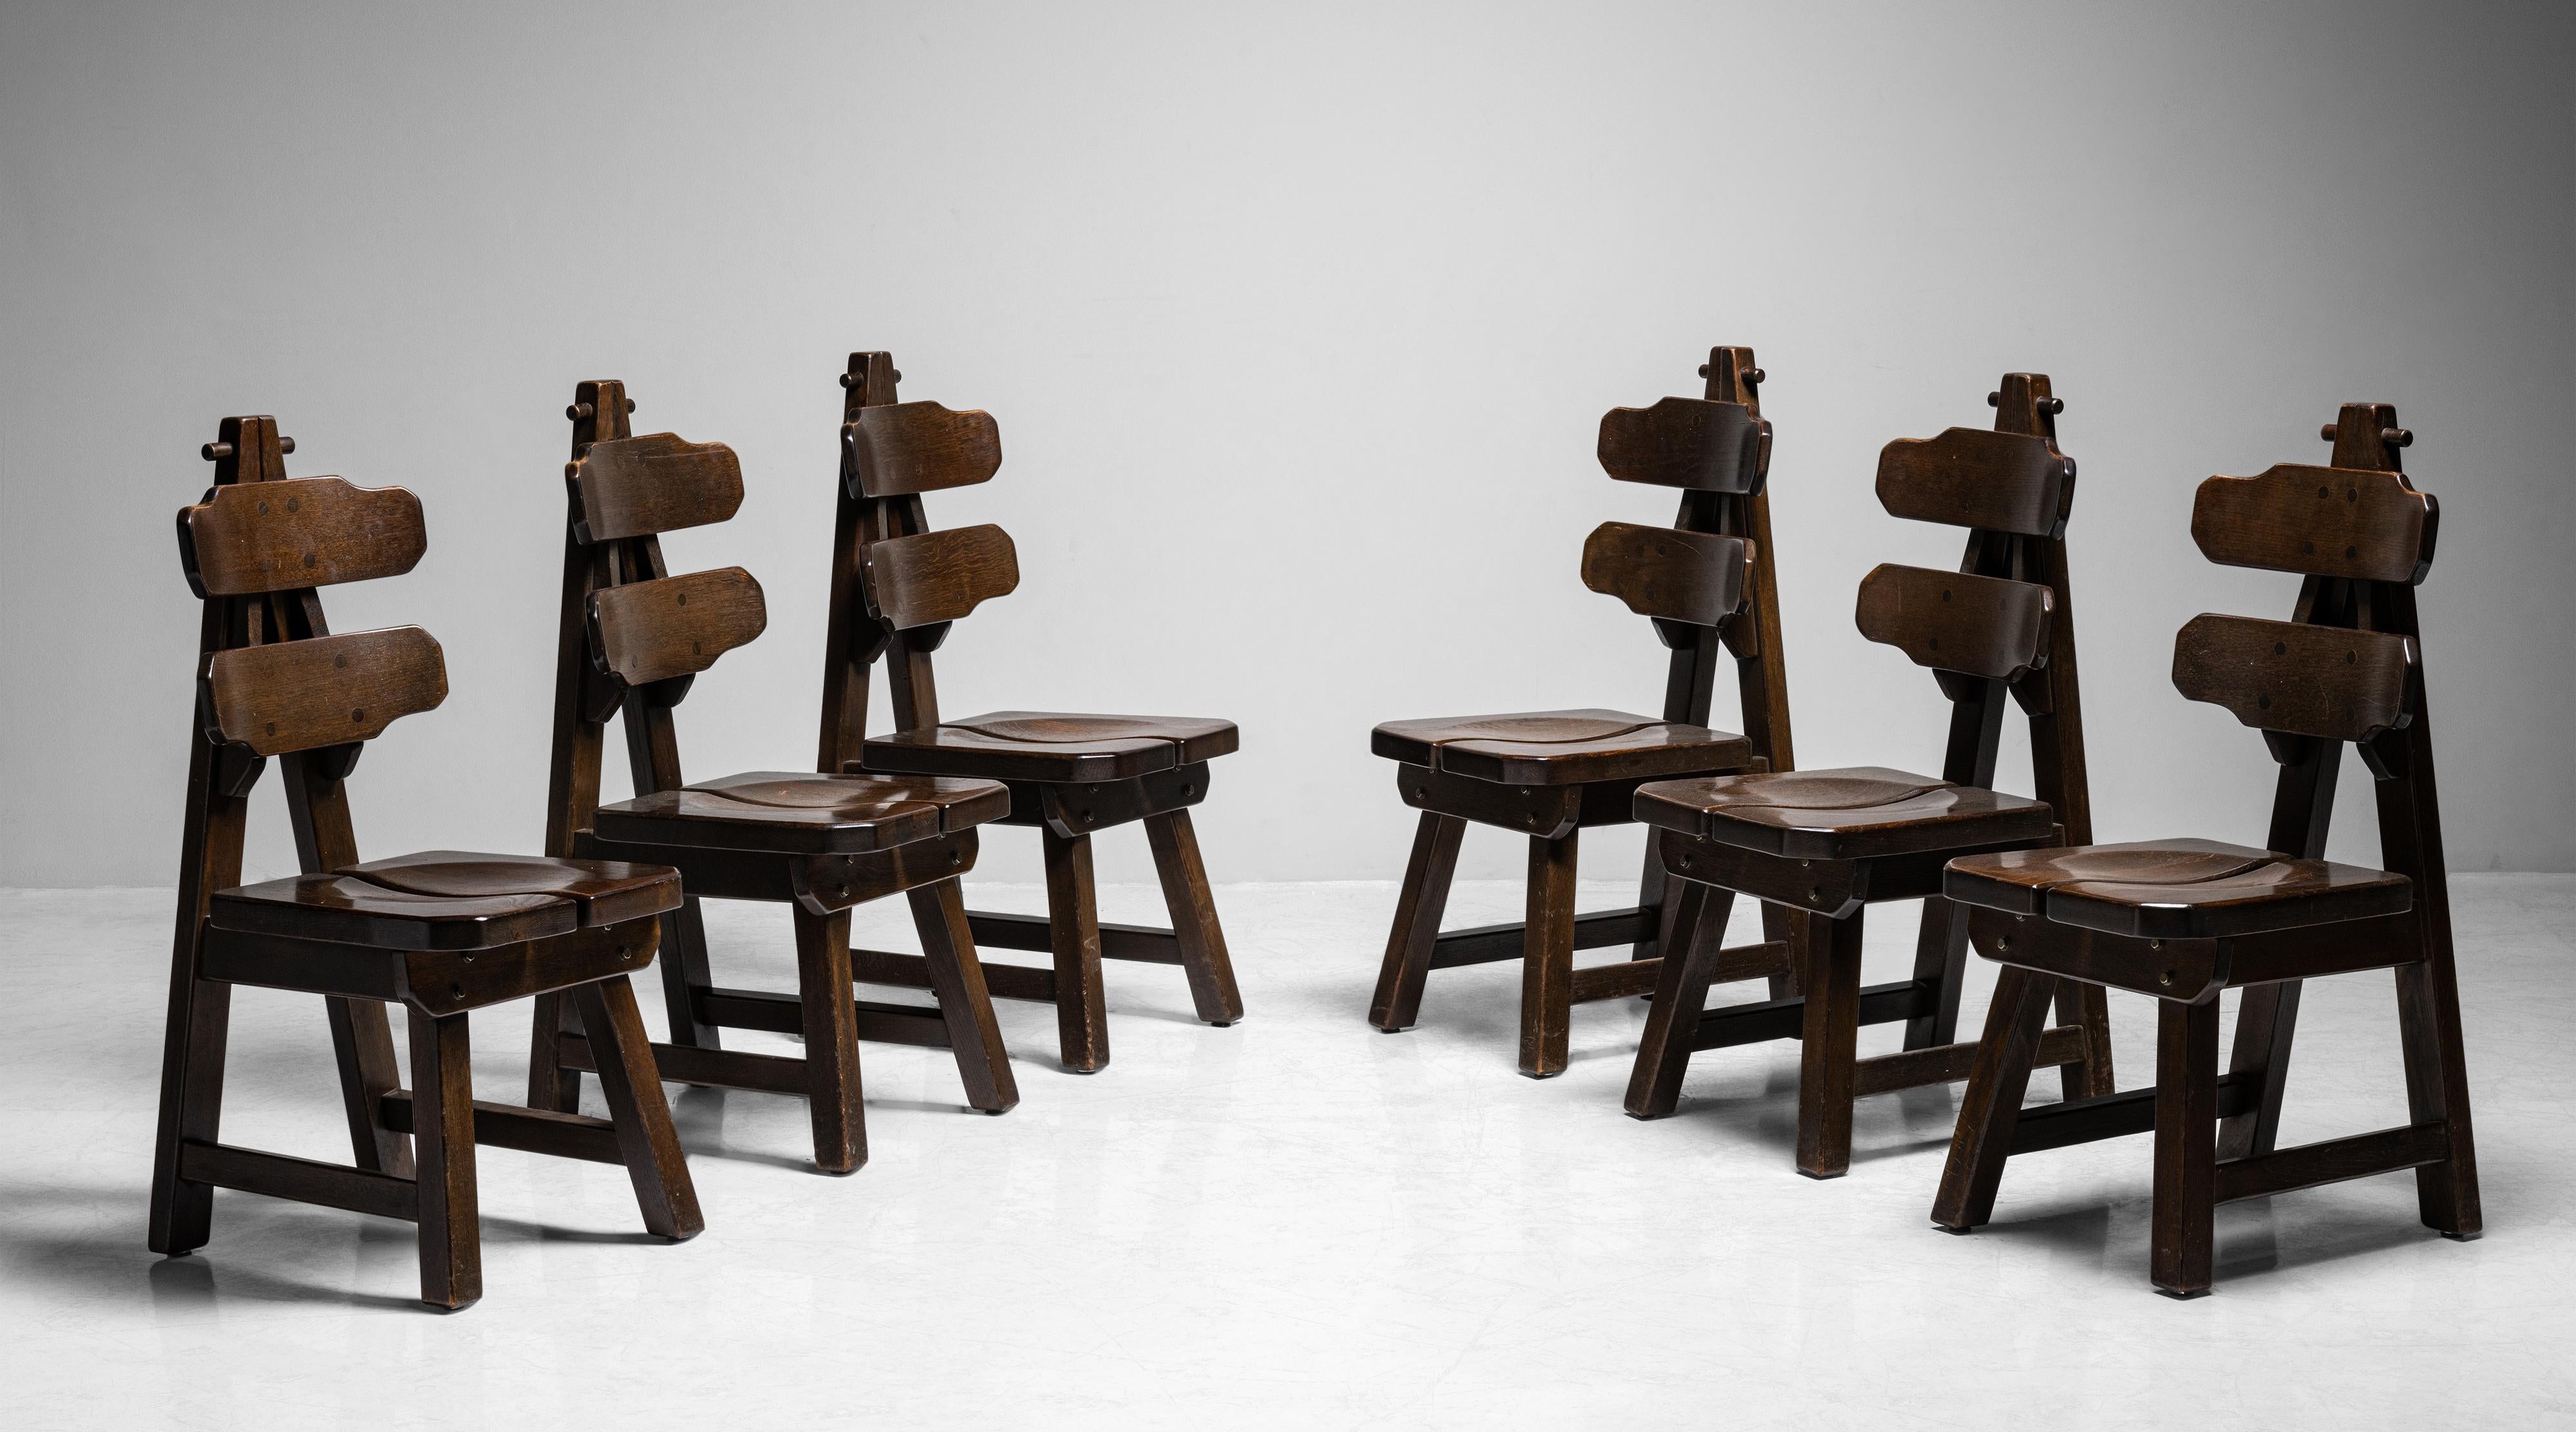 Set of (6) Brutalist oak dining chairs

France, circa 1970

Quality design and joinery. Curved oak seat and back, in original dark stain.

Measures: 17.75